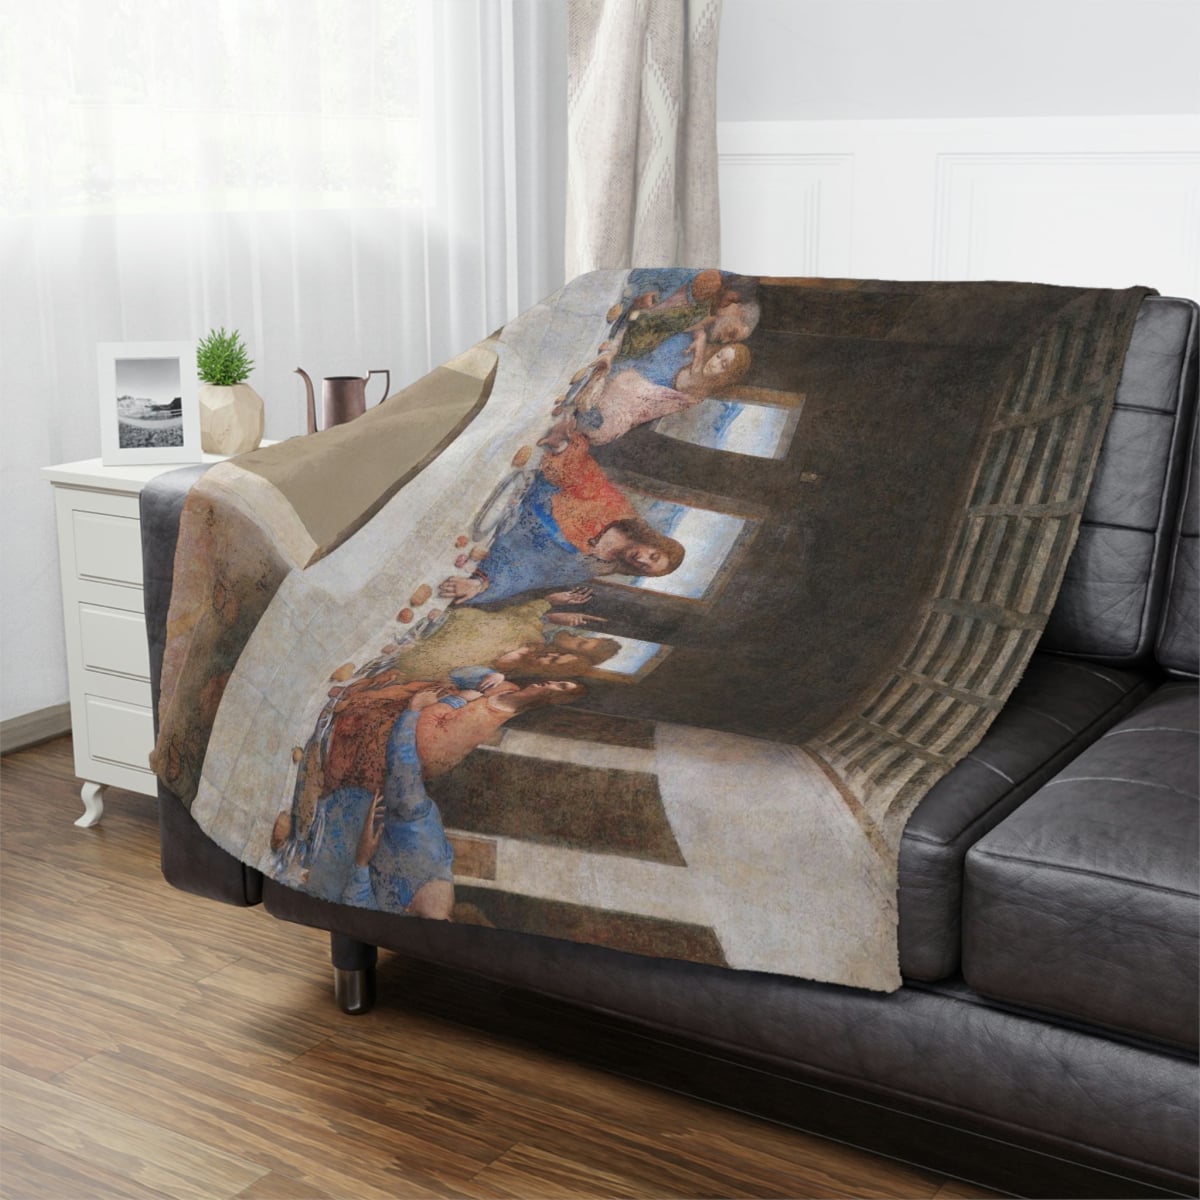 A Blend of Art and Comfort for Your Home Decor